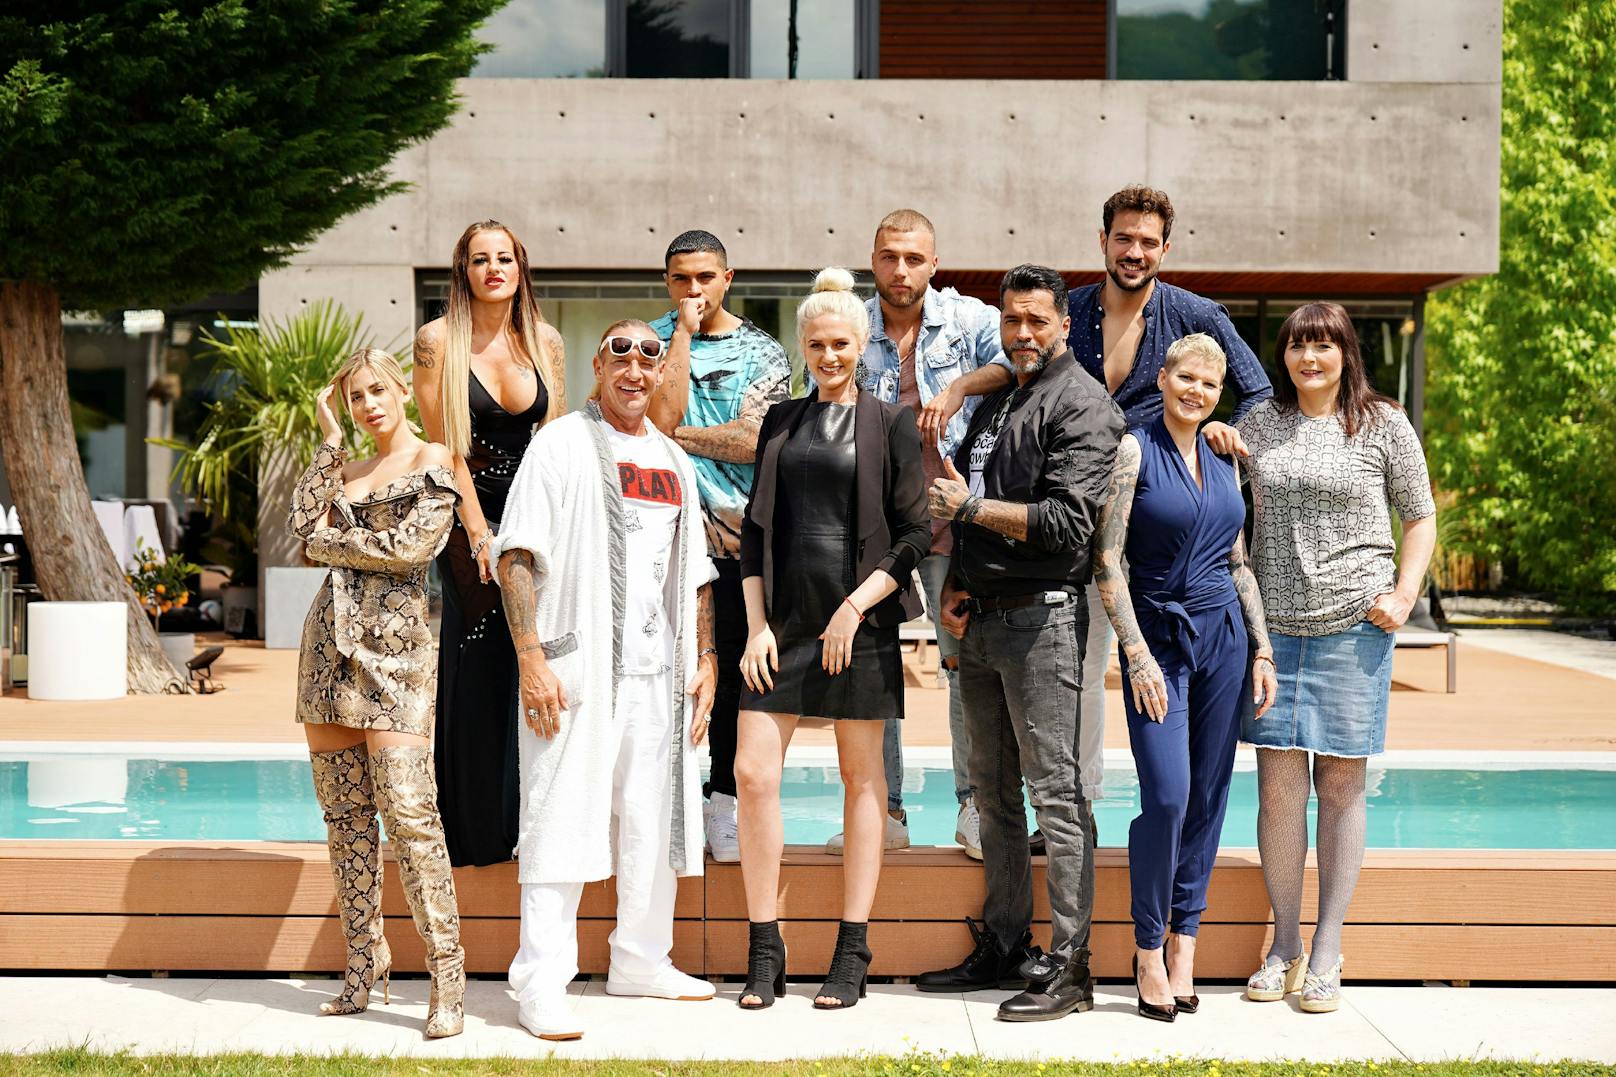 "Like Me - I'm Famous" startet am 11. August 2020 auf TVNOW.